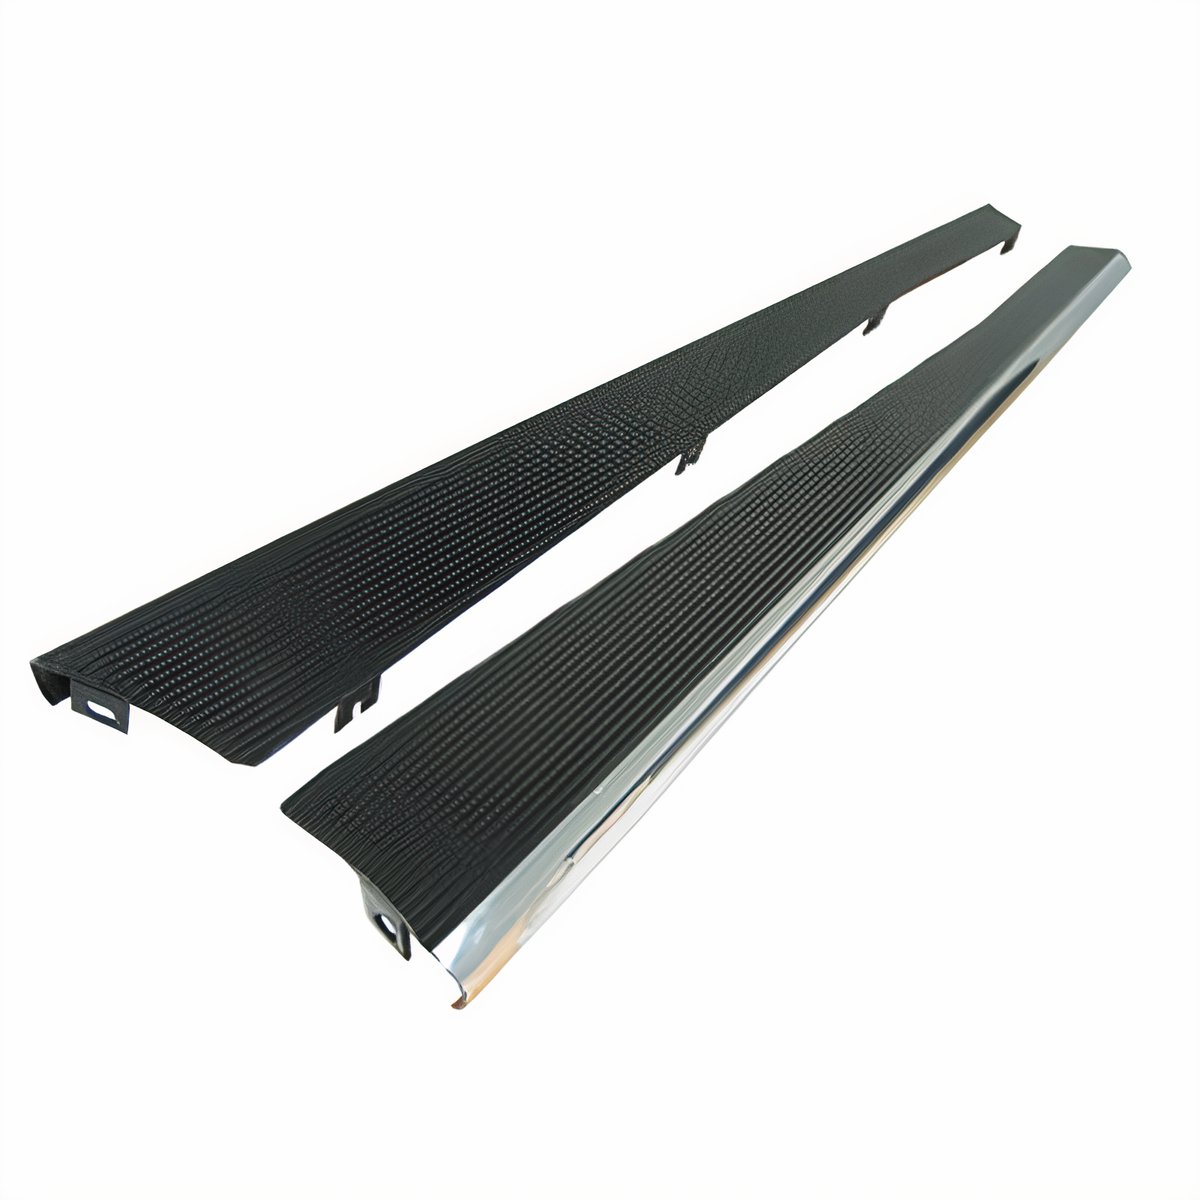 VW Running Boards - Billet Aluminum - Satin Black With Polished Lip - Made in USA - Pair